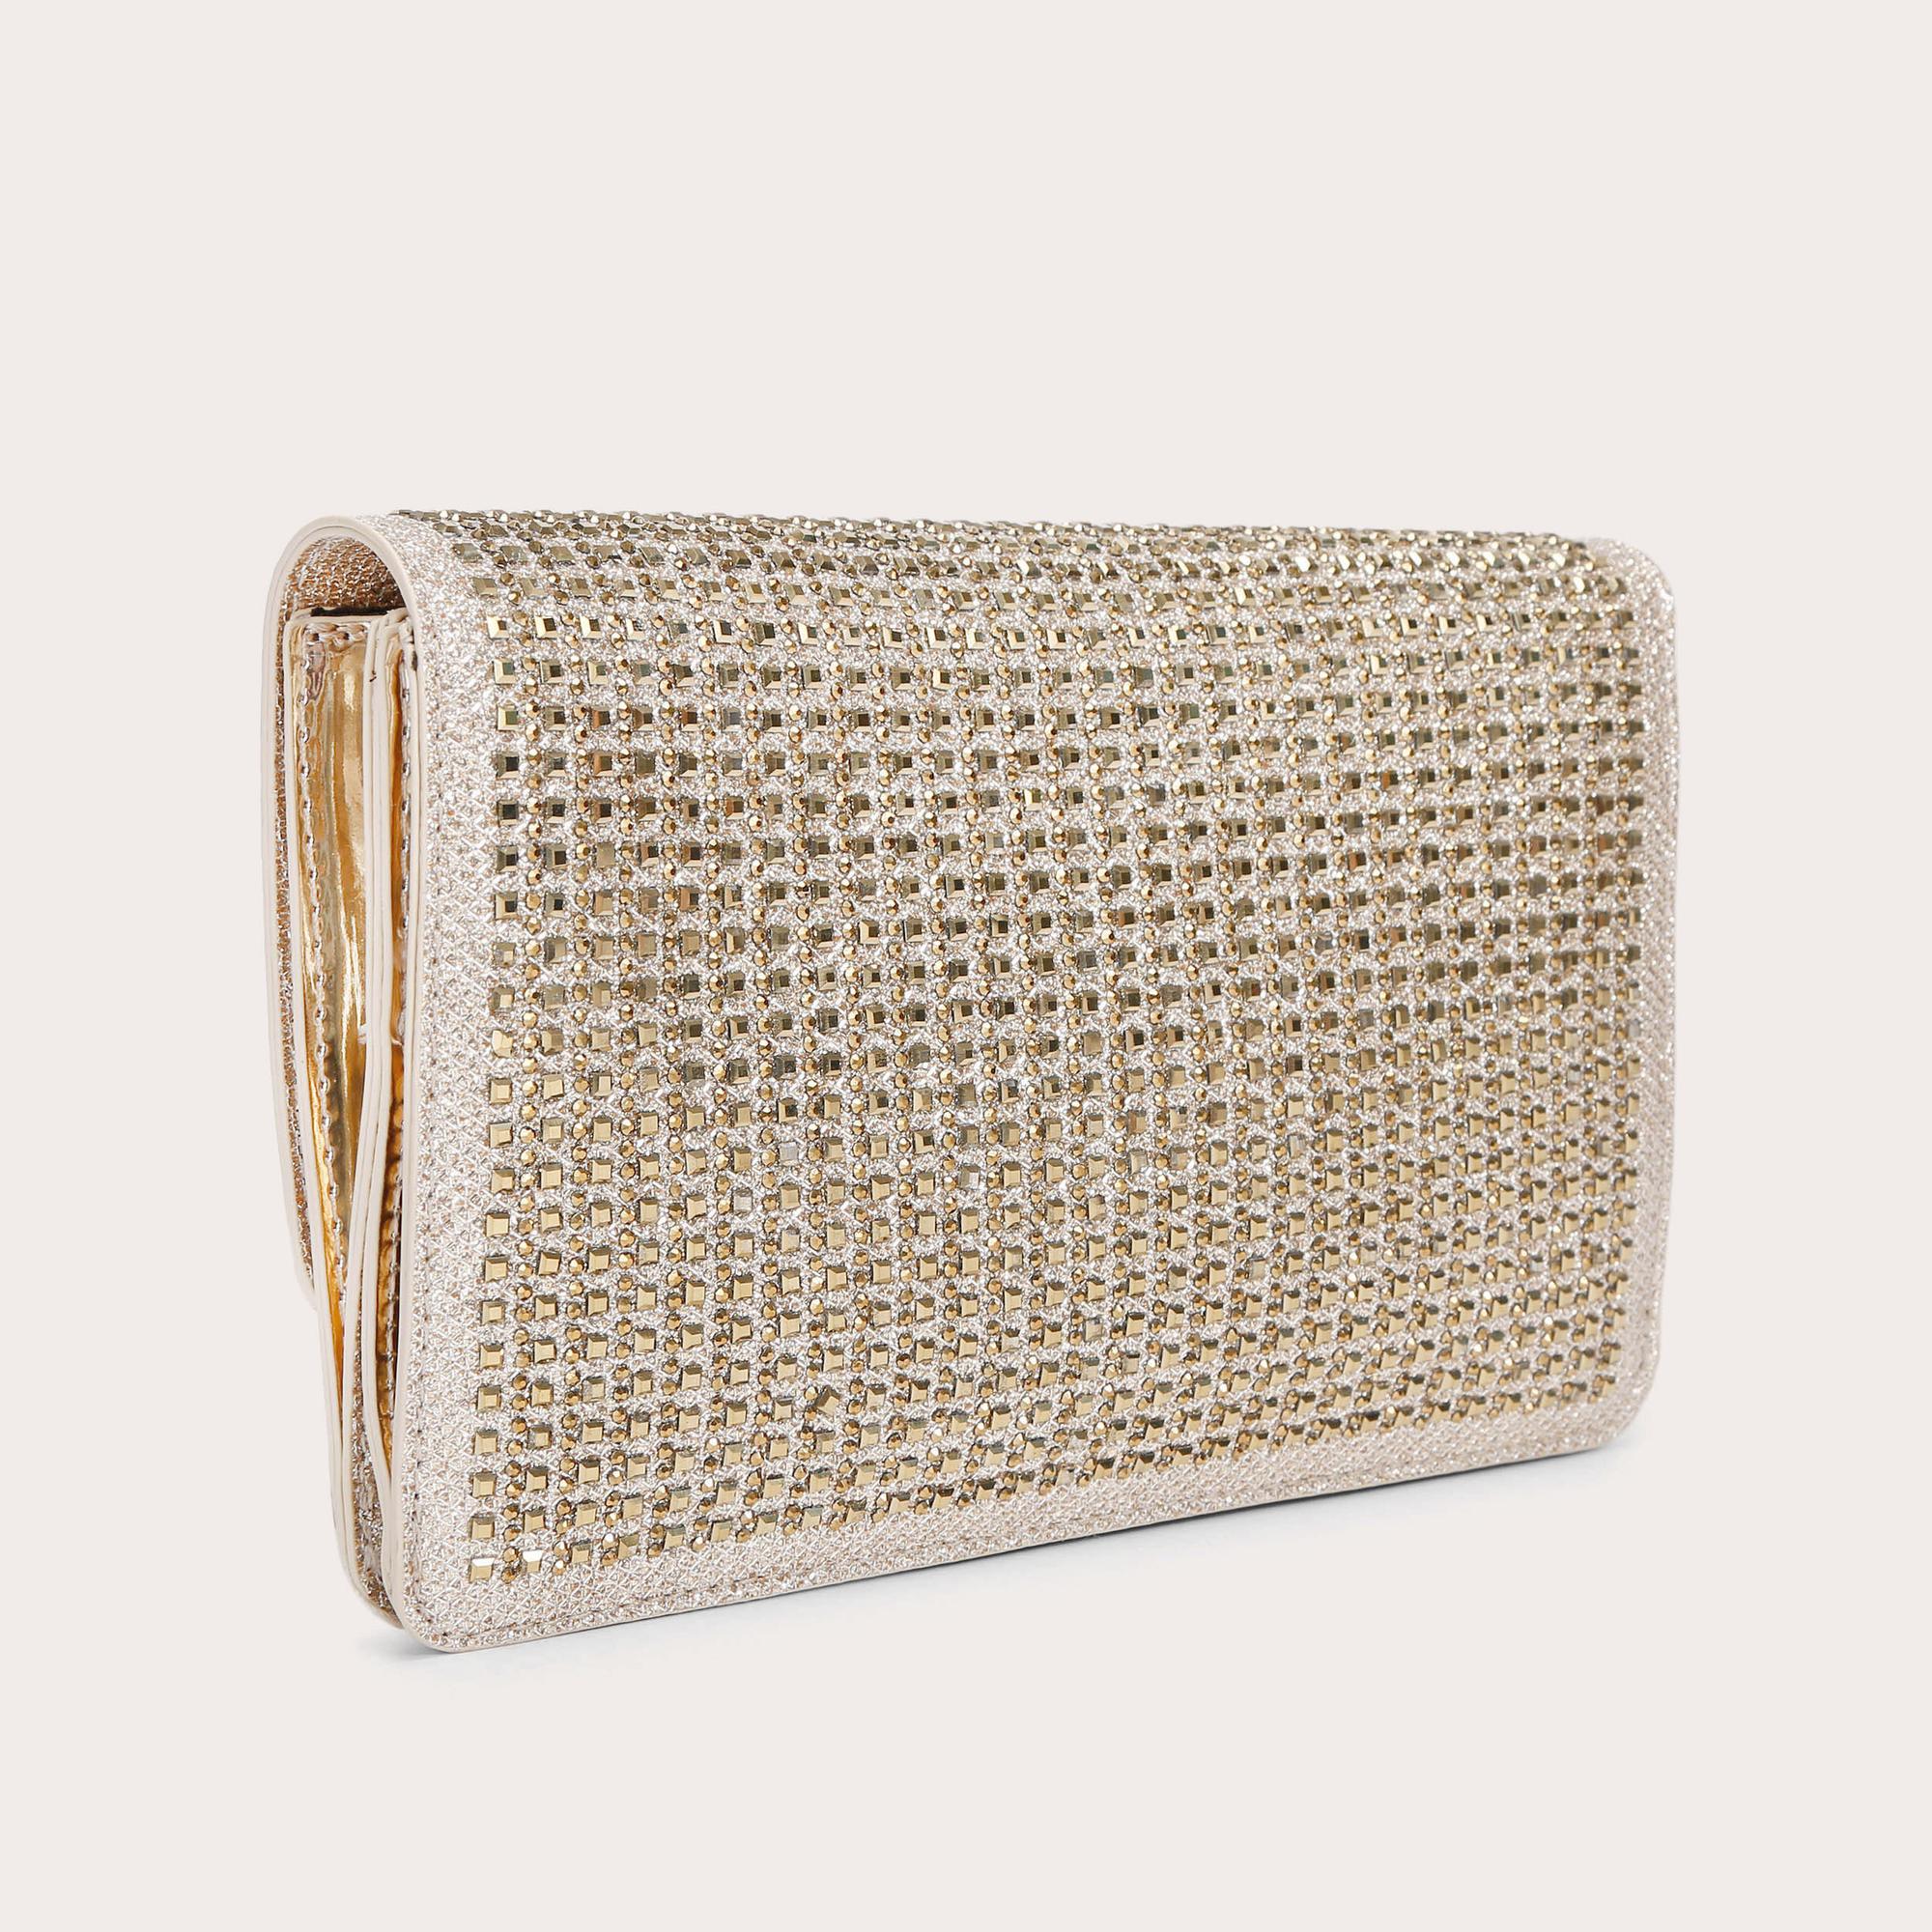 Clutch & Evening Bags, Nude, Black, Embellished & Chain